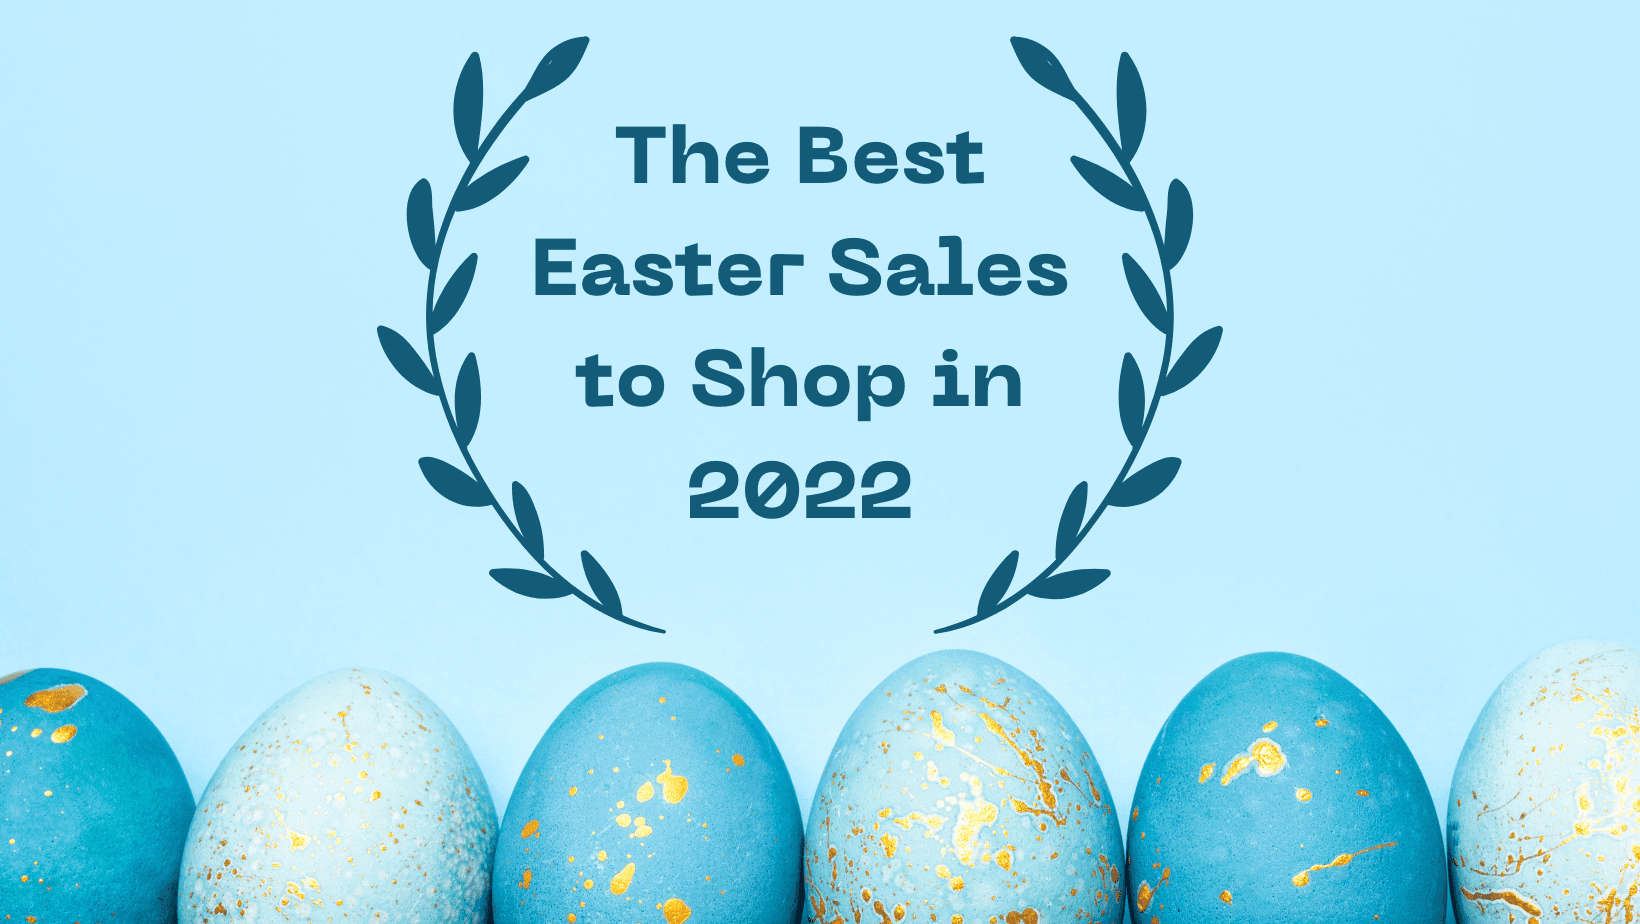 The Best Easter Sales to Shop in 2022